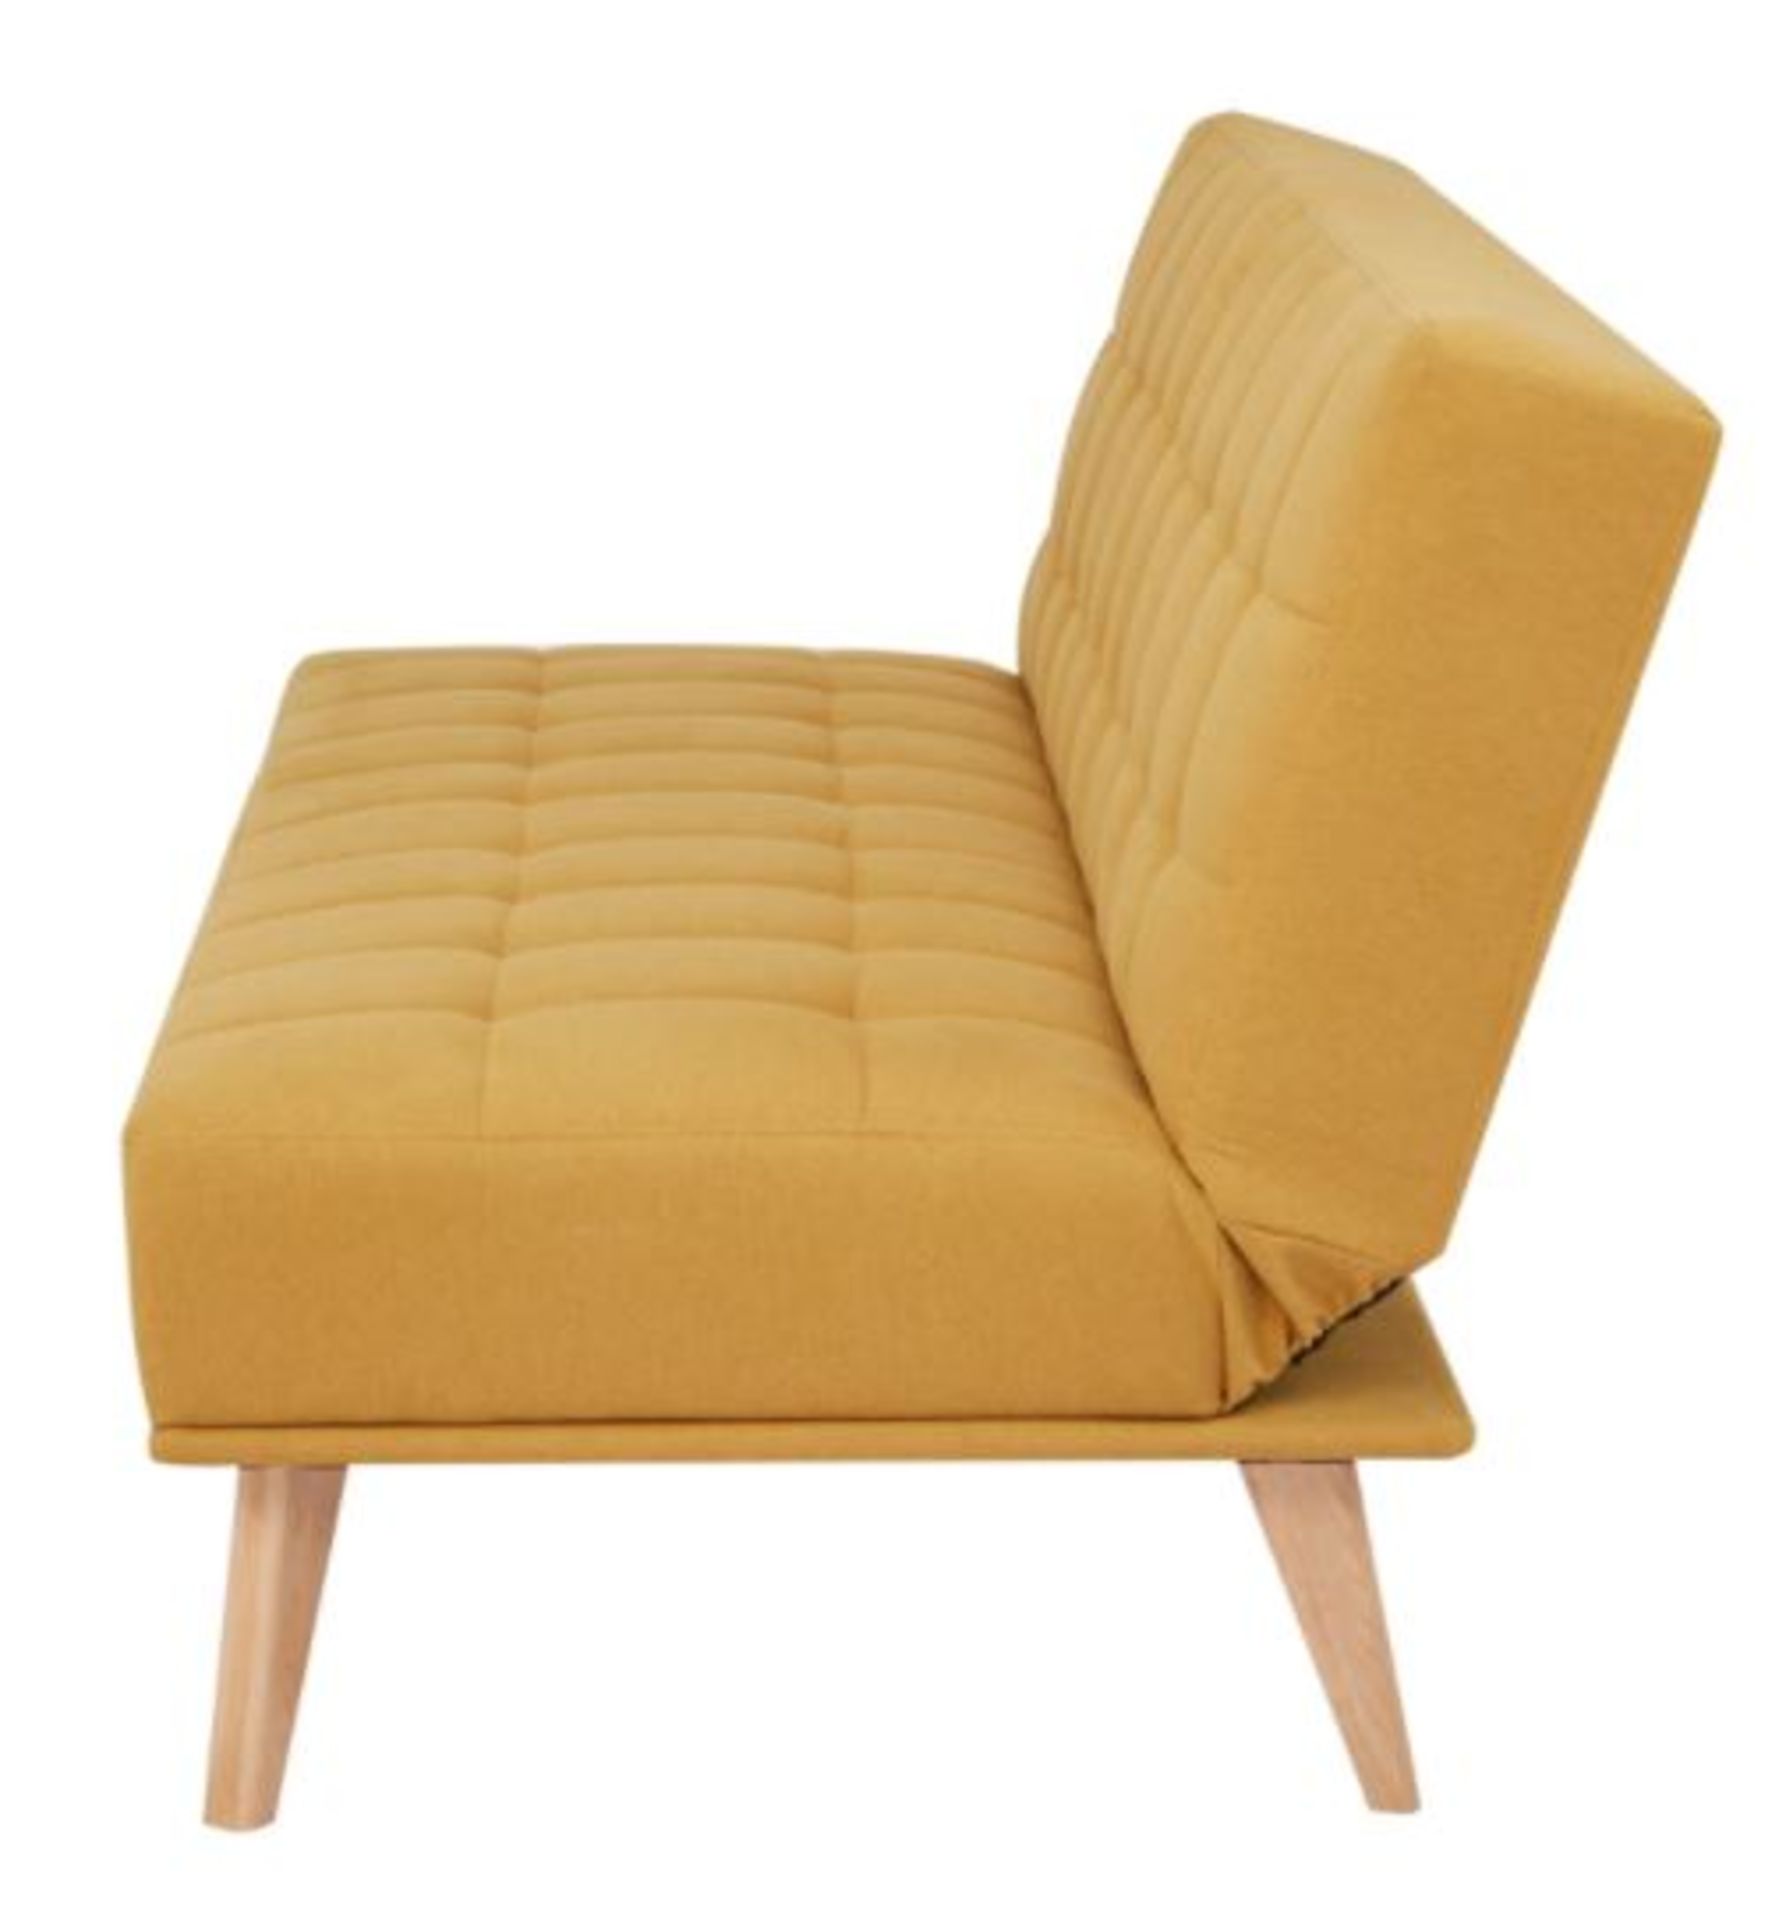 1 X Click Clack Kelly Sofa Bed Ochre. Wooden Frame With Solid Birchwood Legs. 100% Polyester Fabric - Image 4 of 9